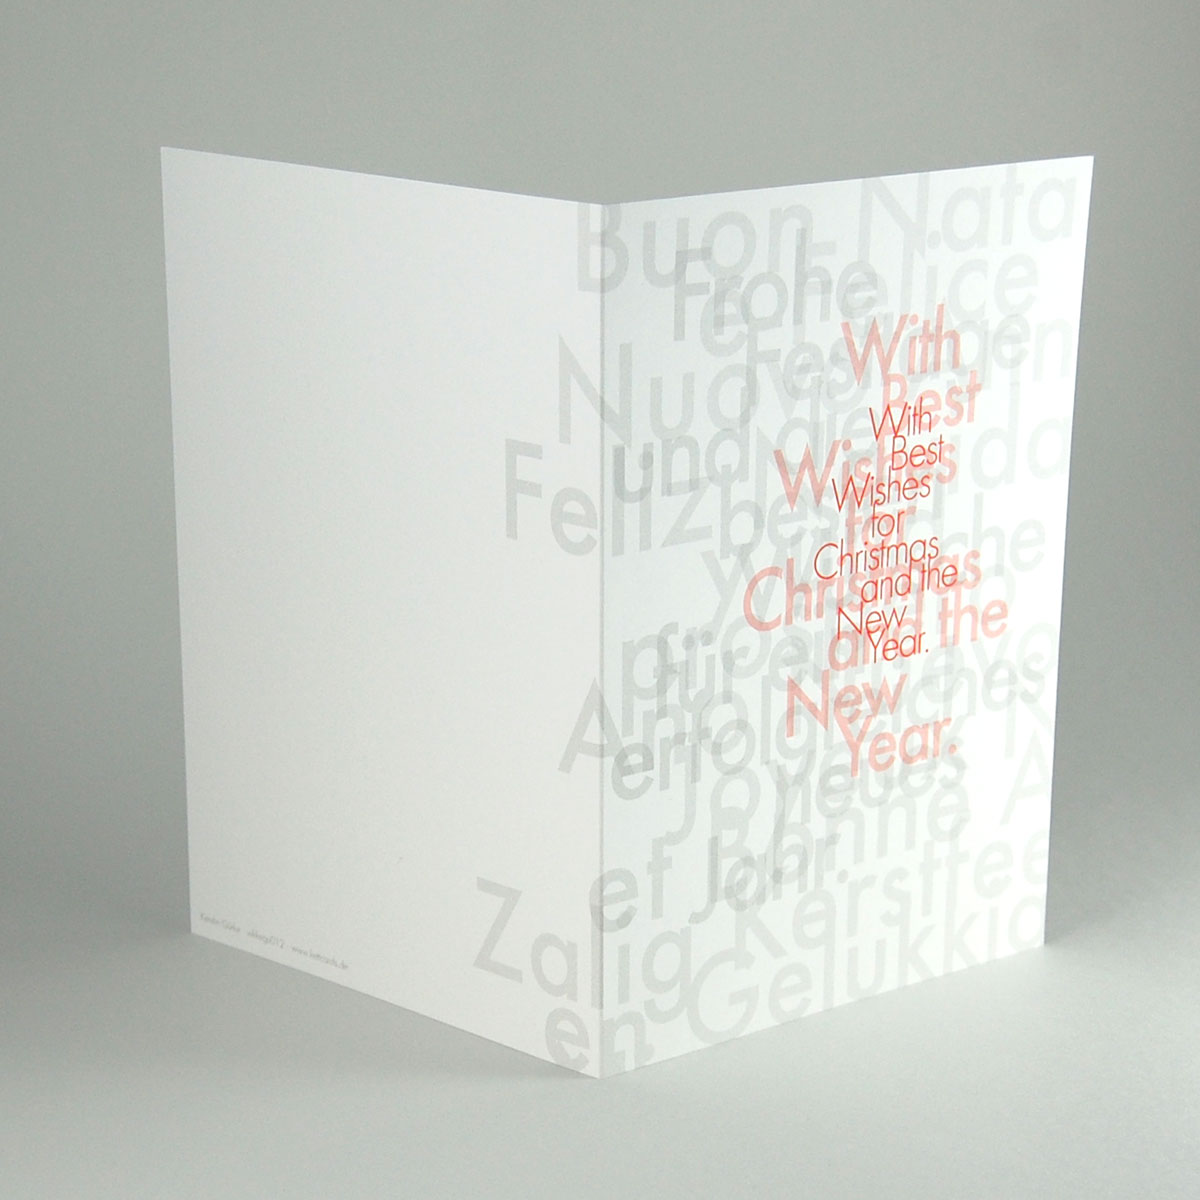 With Best Wishes for Christmas and the New Year. - Frohe Festtage, typografische Weihnachtskarte mit Text